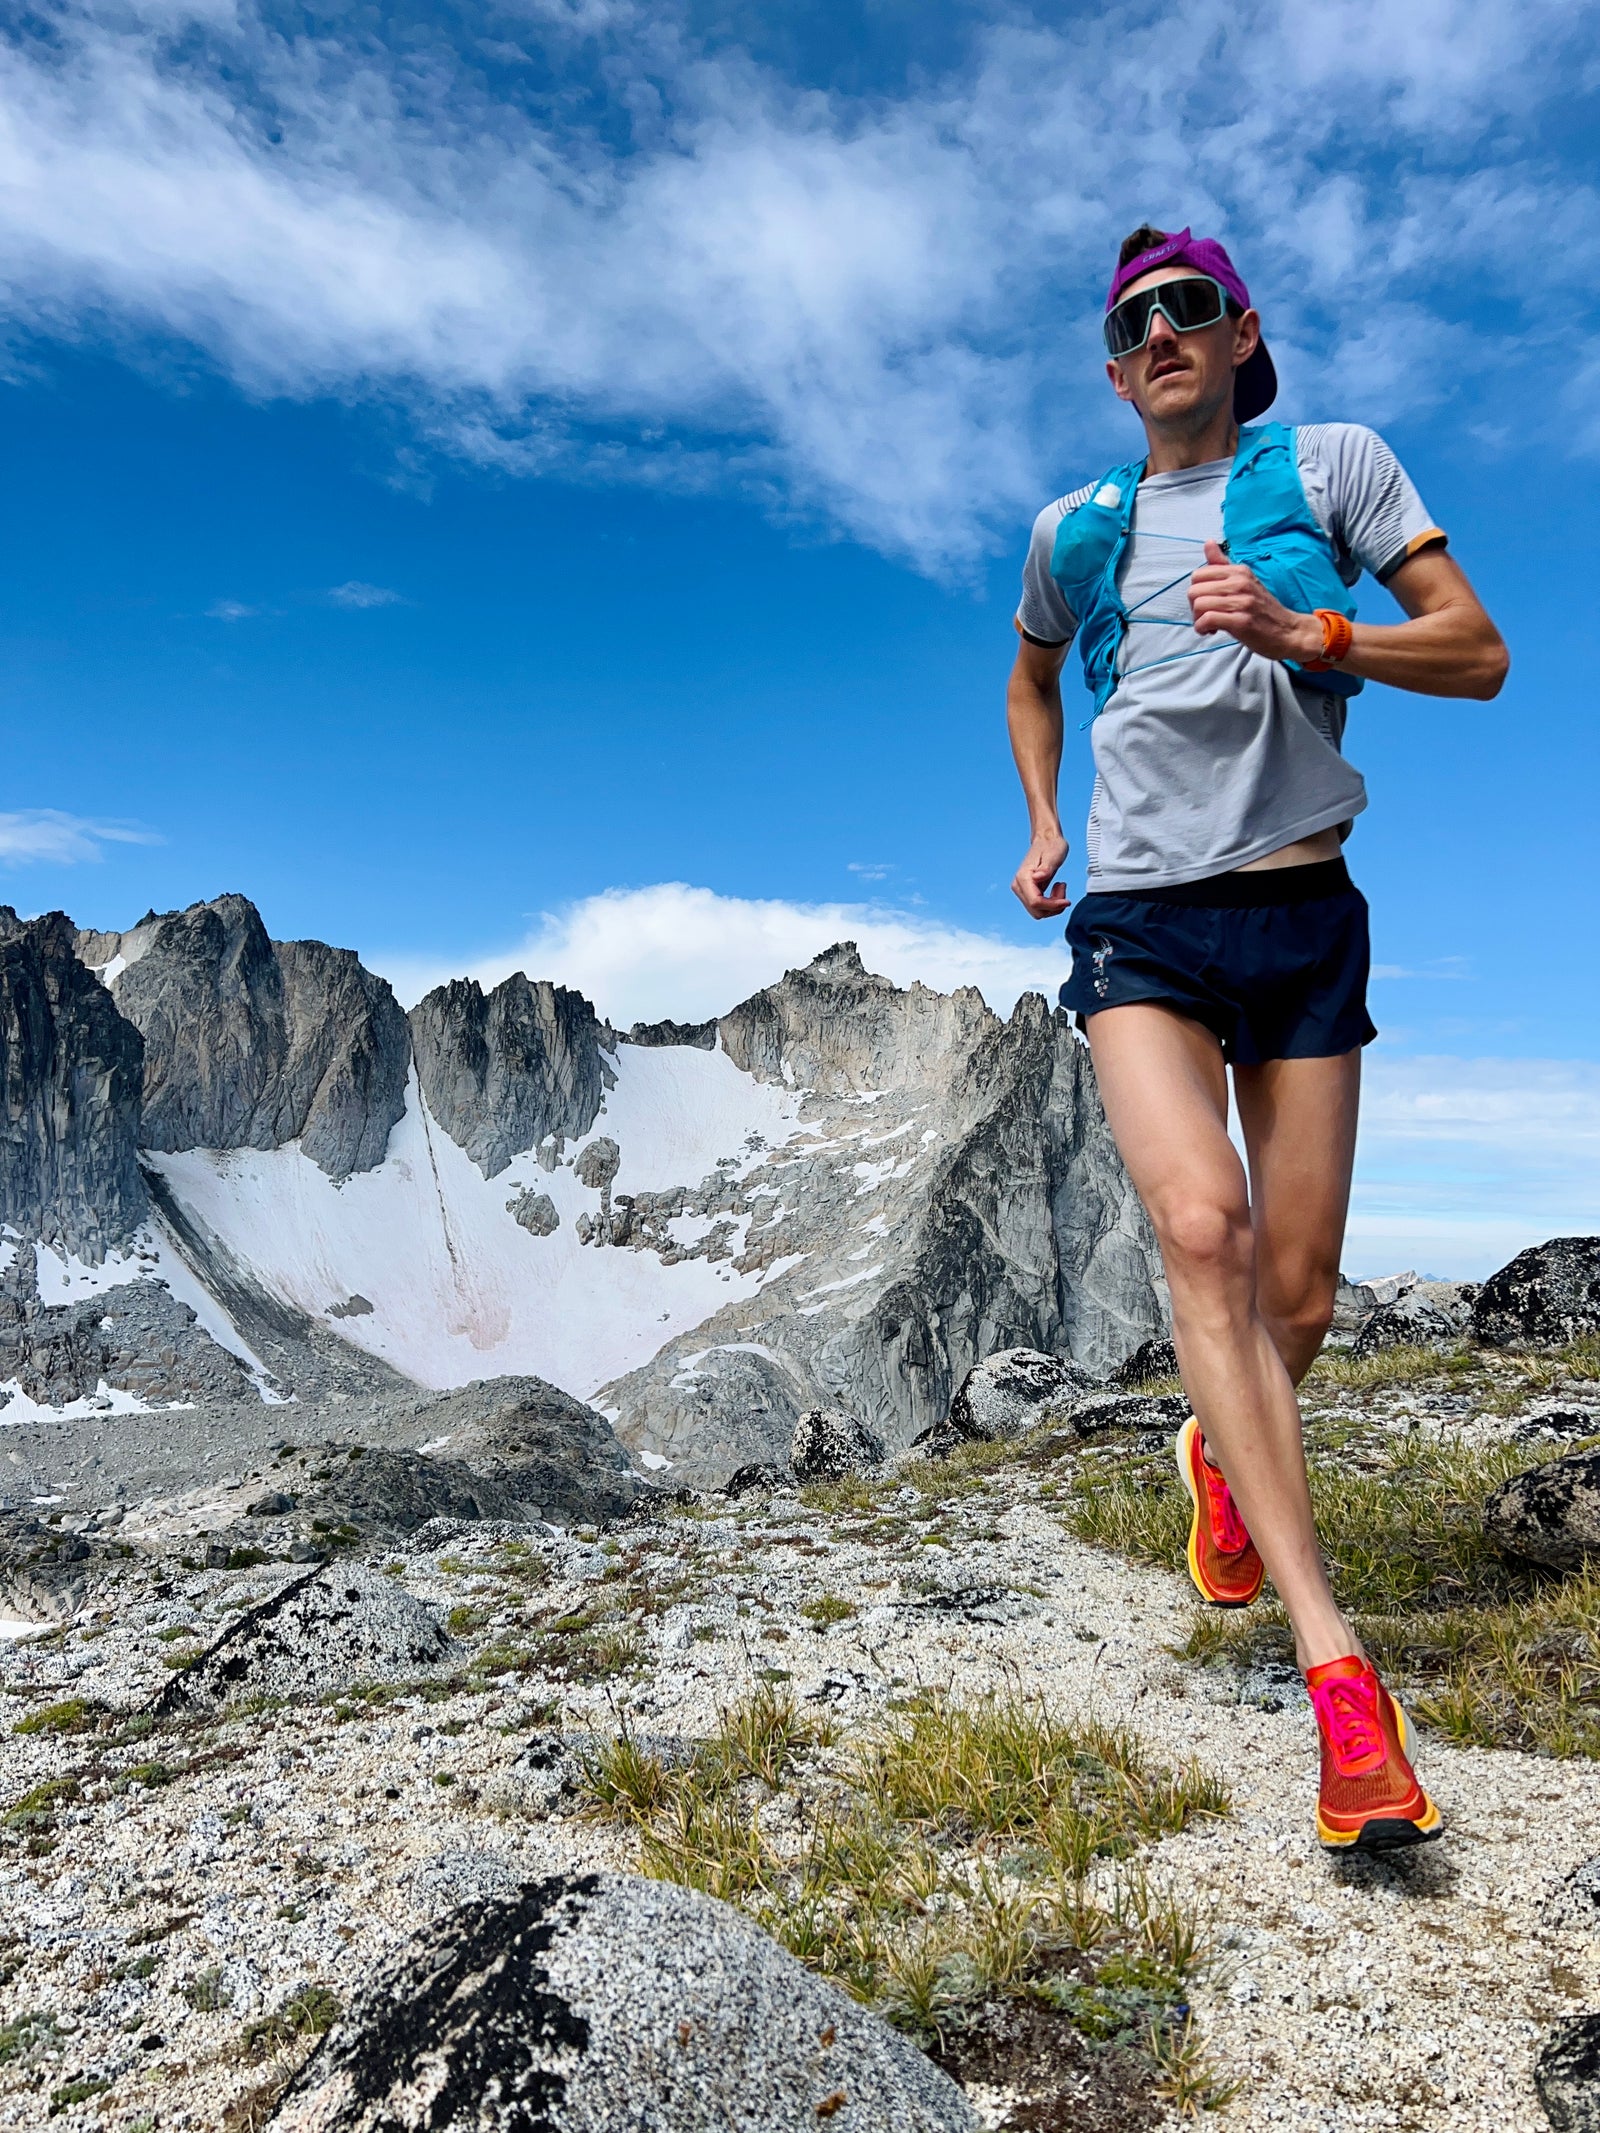 4 Awesome Sauce Trail “Runs” in Chamonix | by David Laney